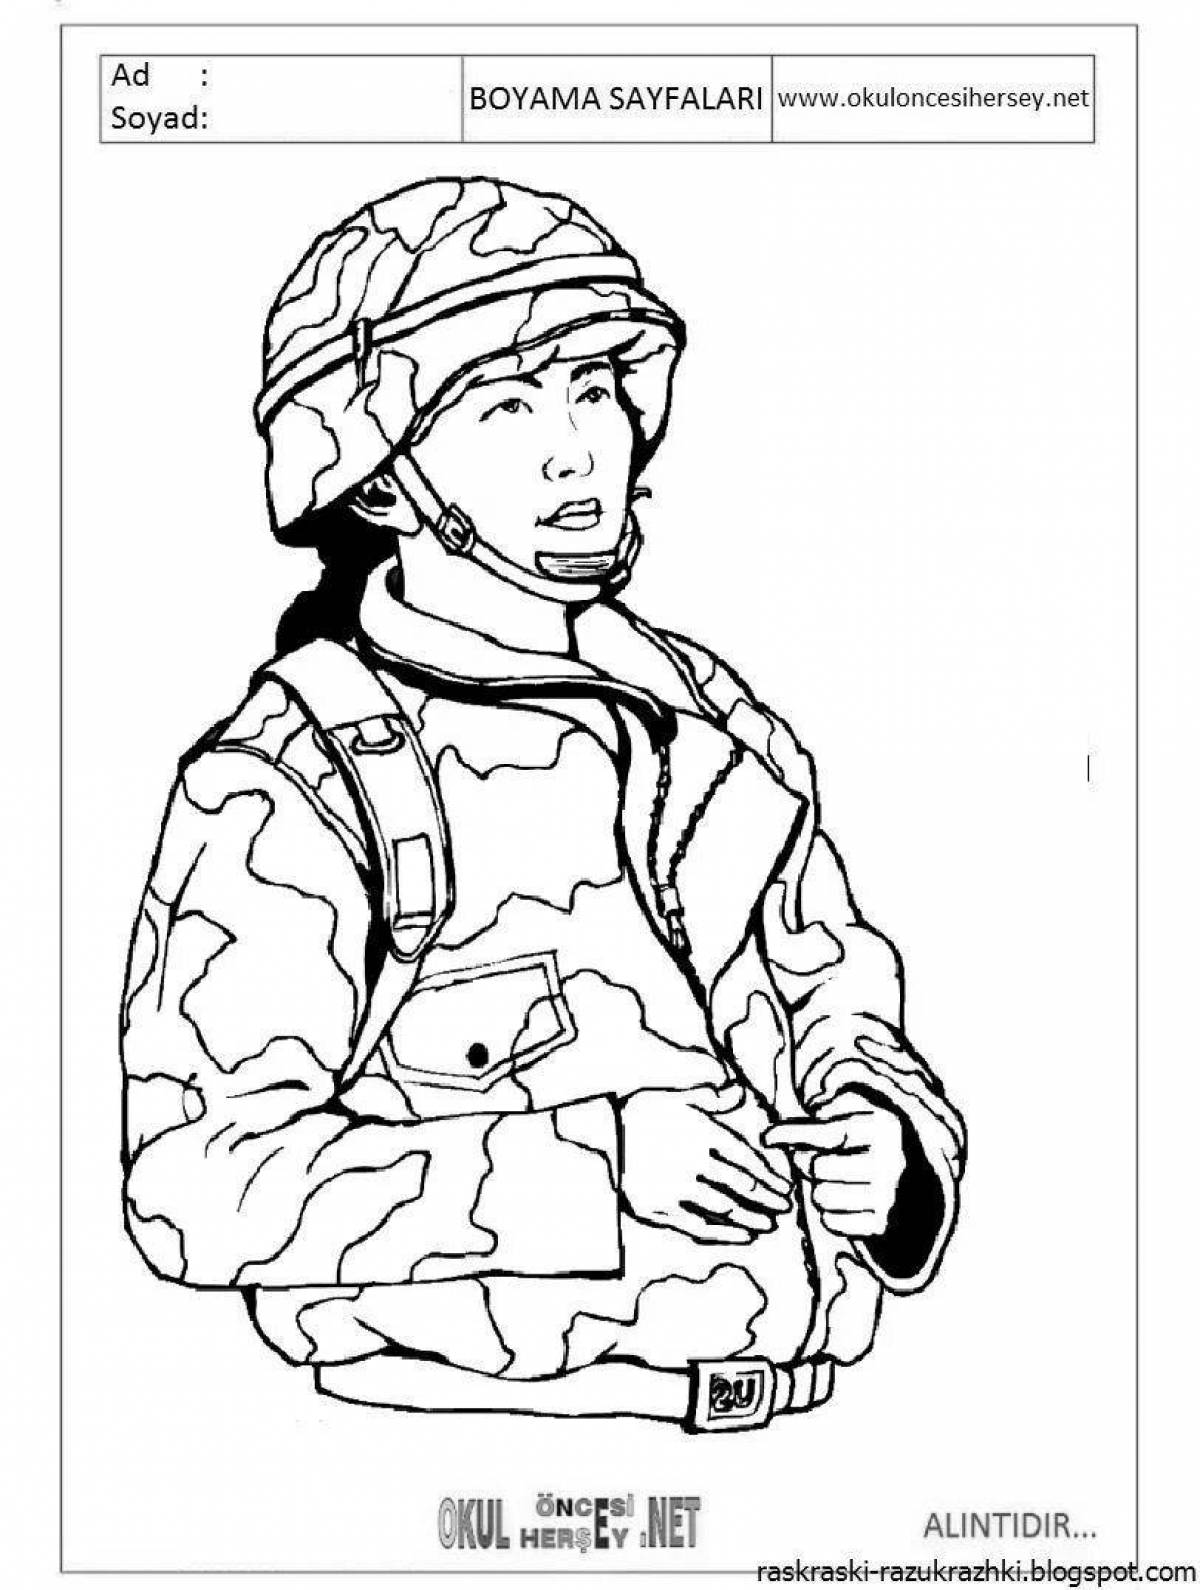 Dazzling soldier coloring pages for boys